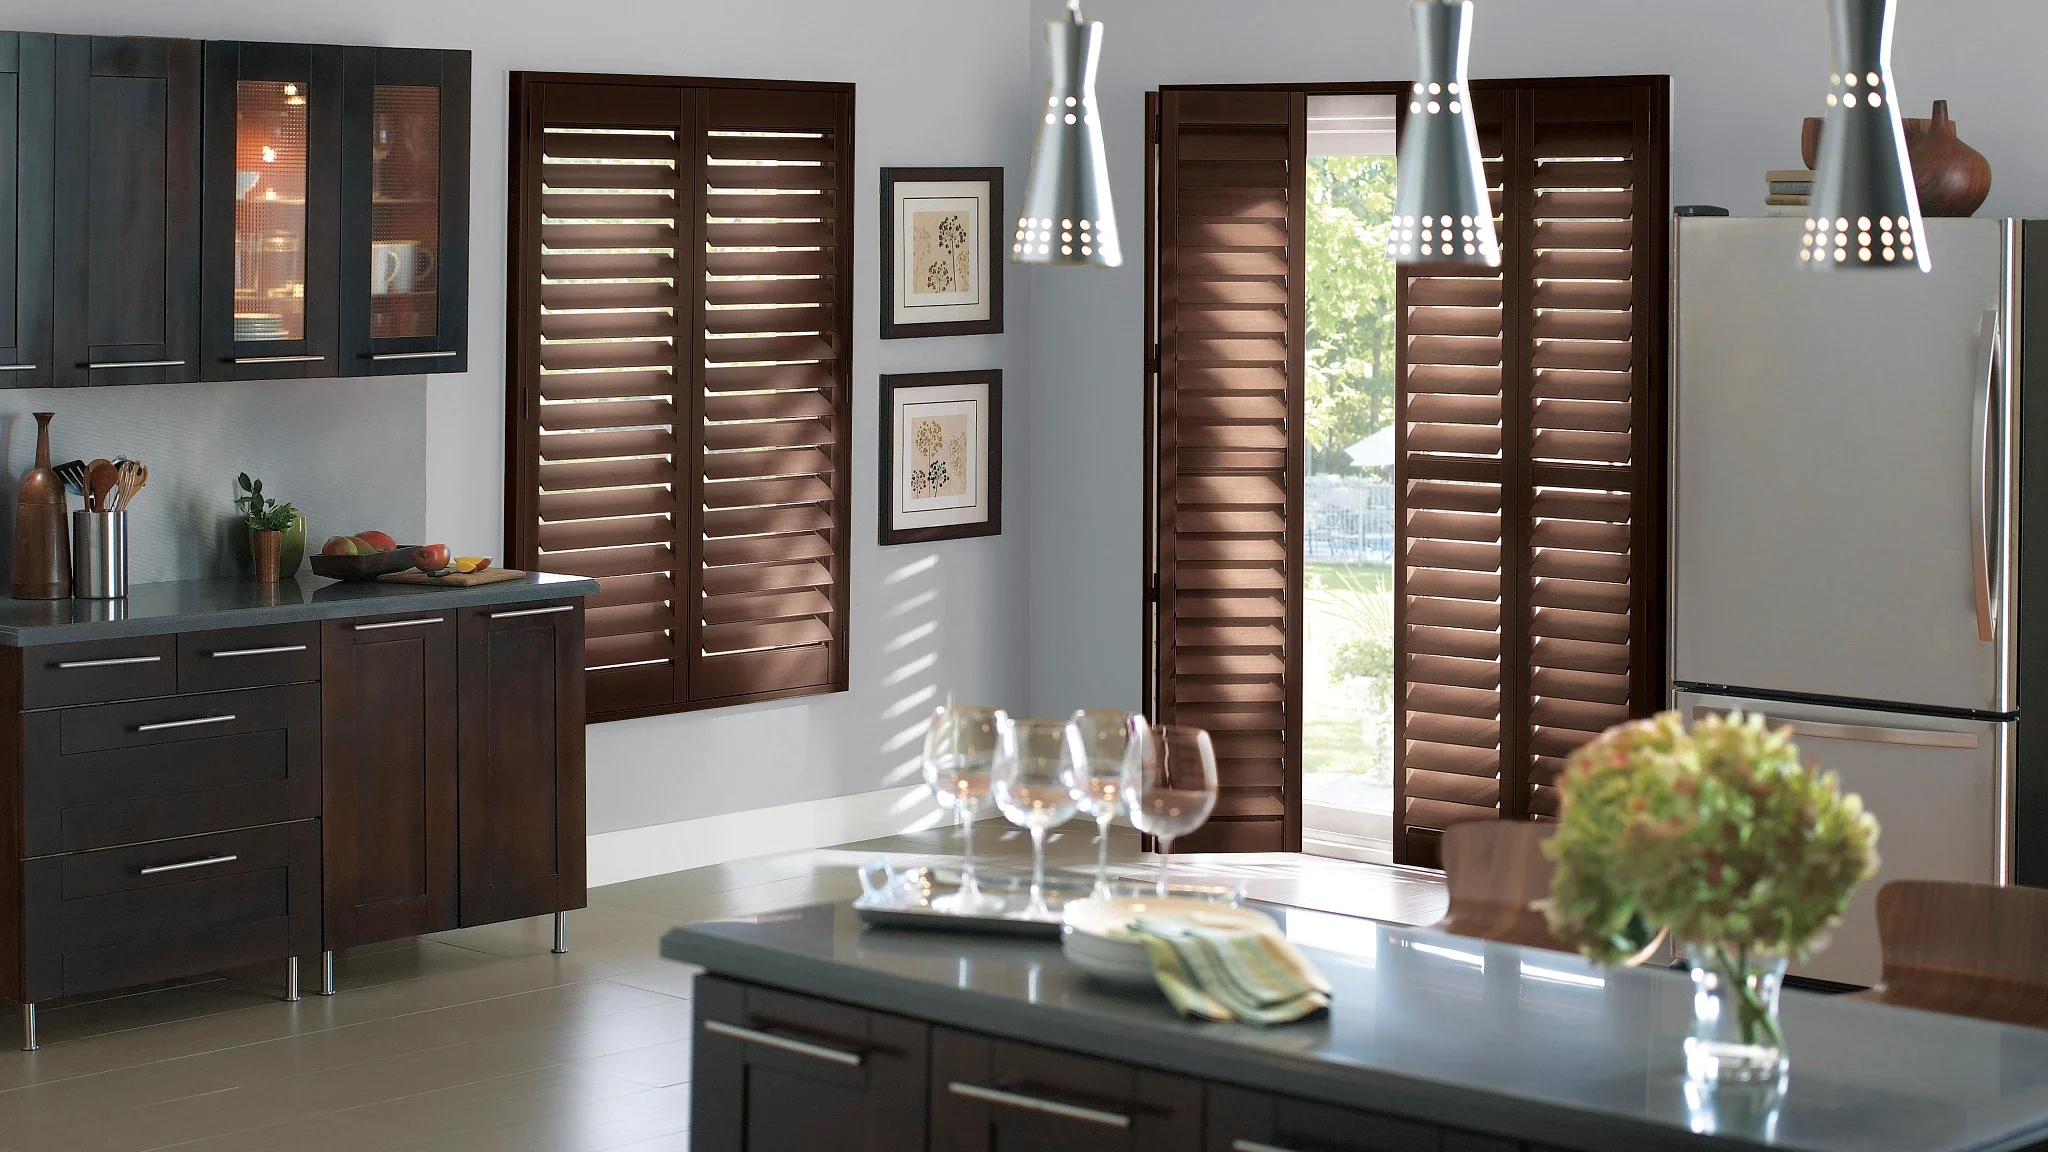 Wood window shutters in kitchen with Bi-fold track system on patio doors.